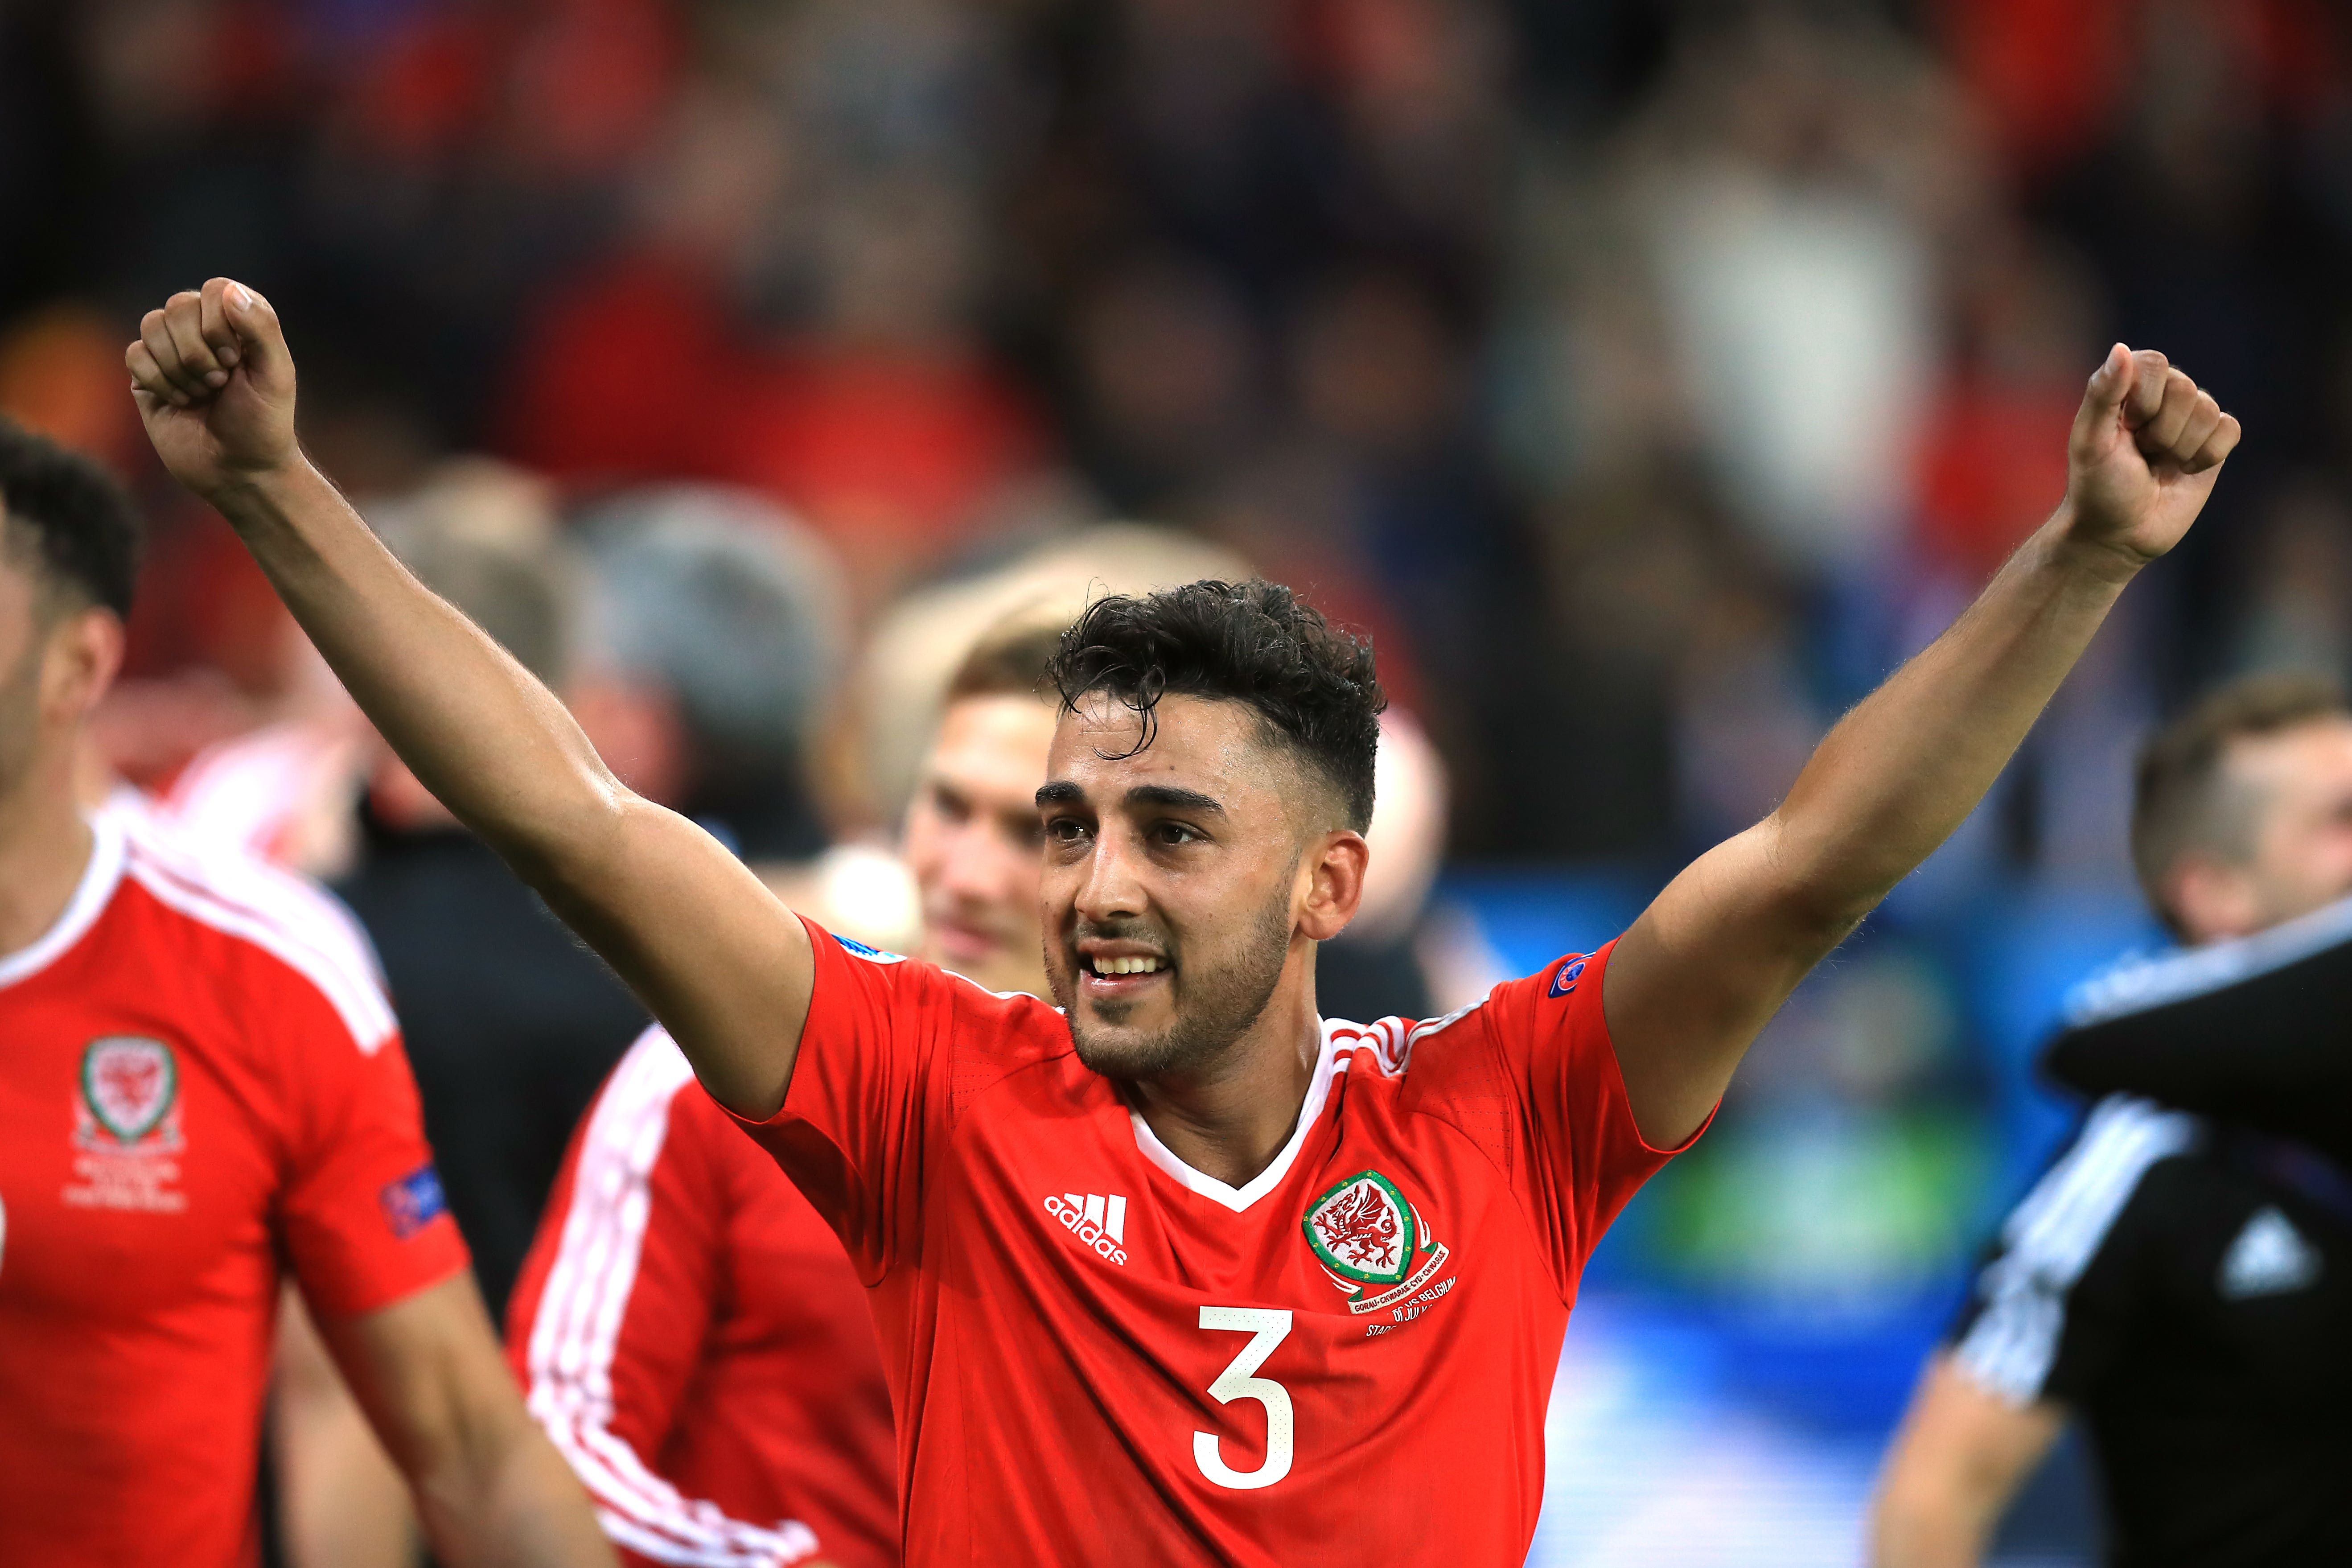 Former Wales international Neil Taylor has offered words of advice for Wrexham’s owners